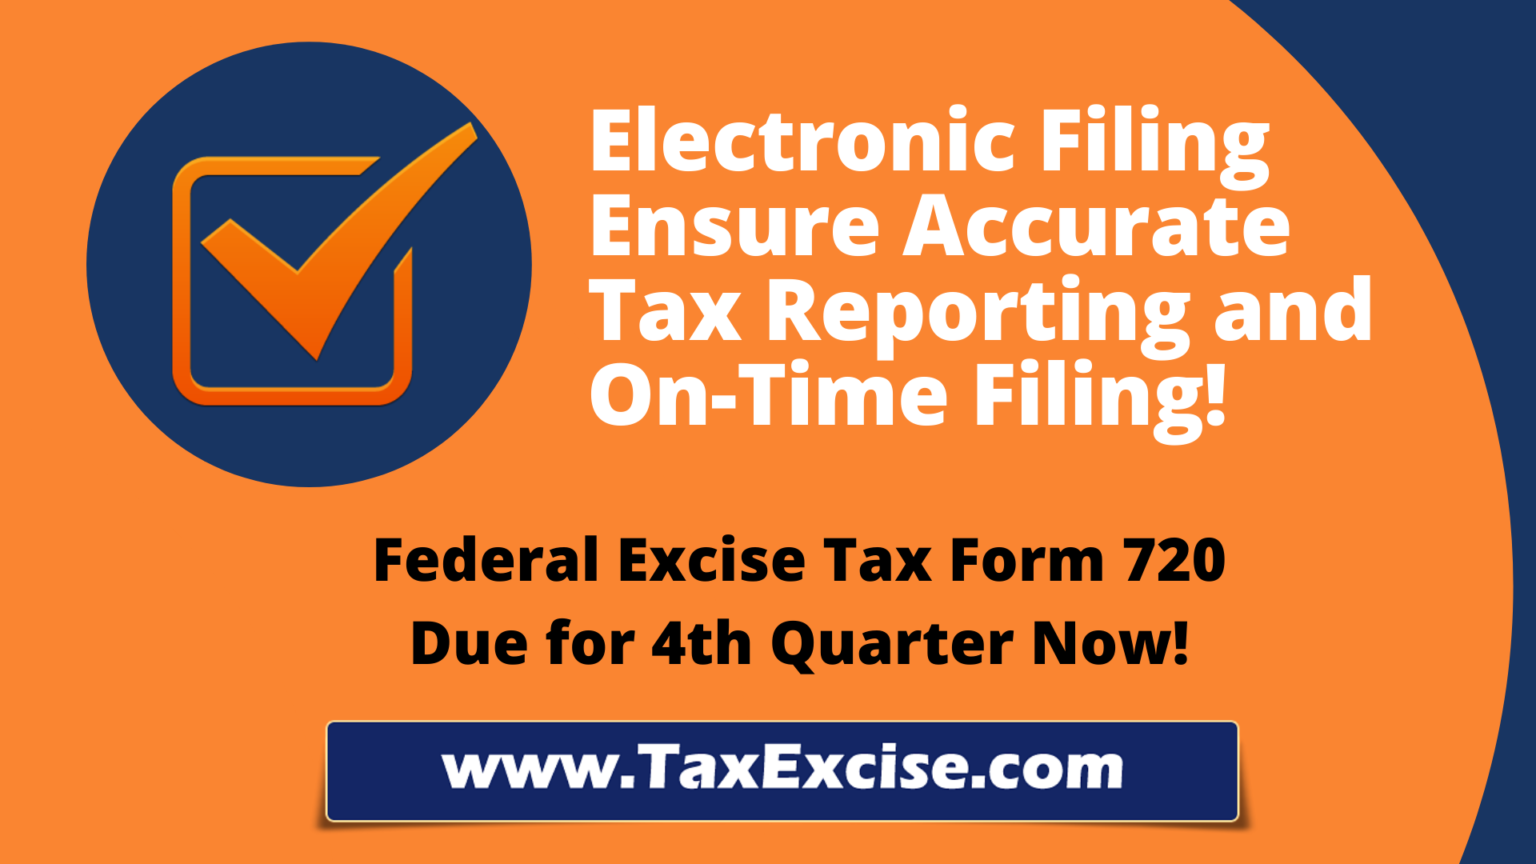 e file excise tax form 720 IRS Authorized Electronic